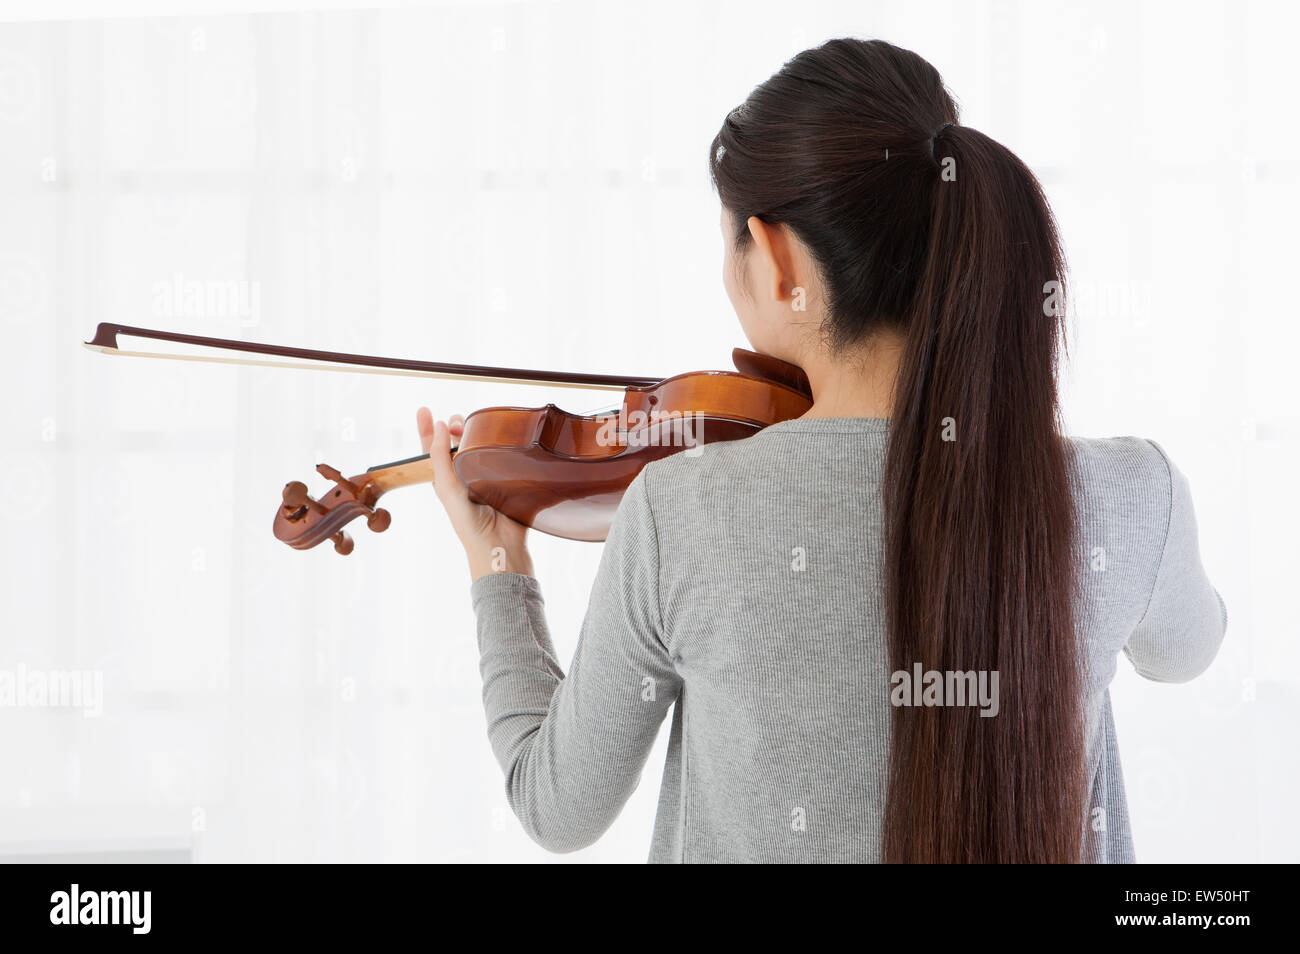 Young woman playing violin with rear view Stock Photo